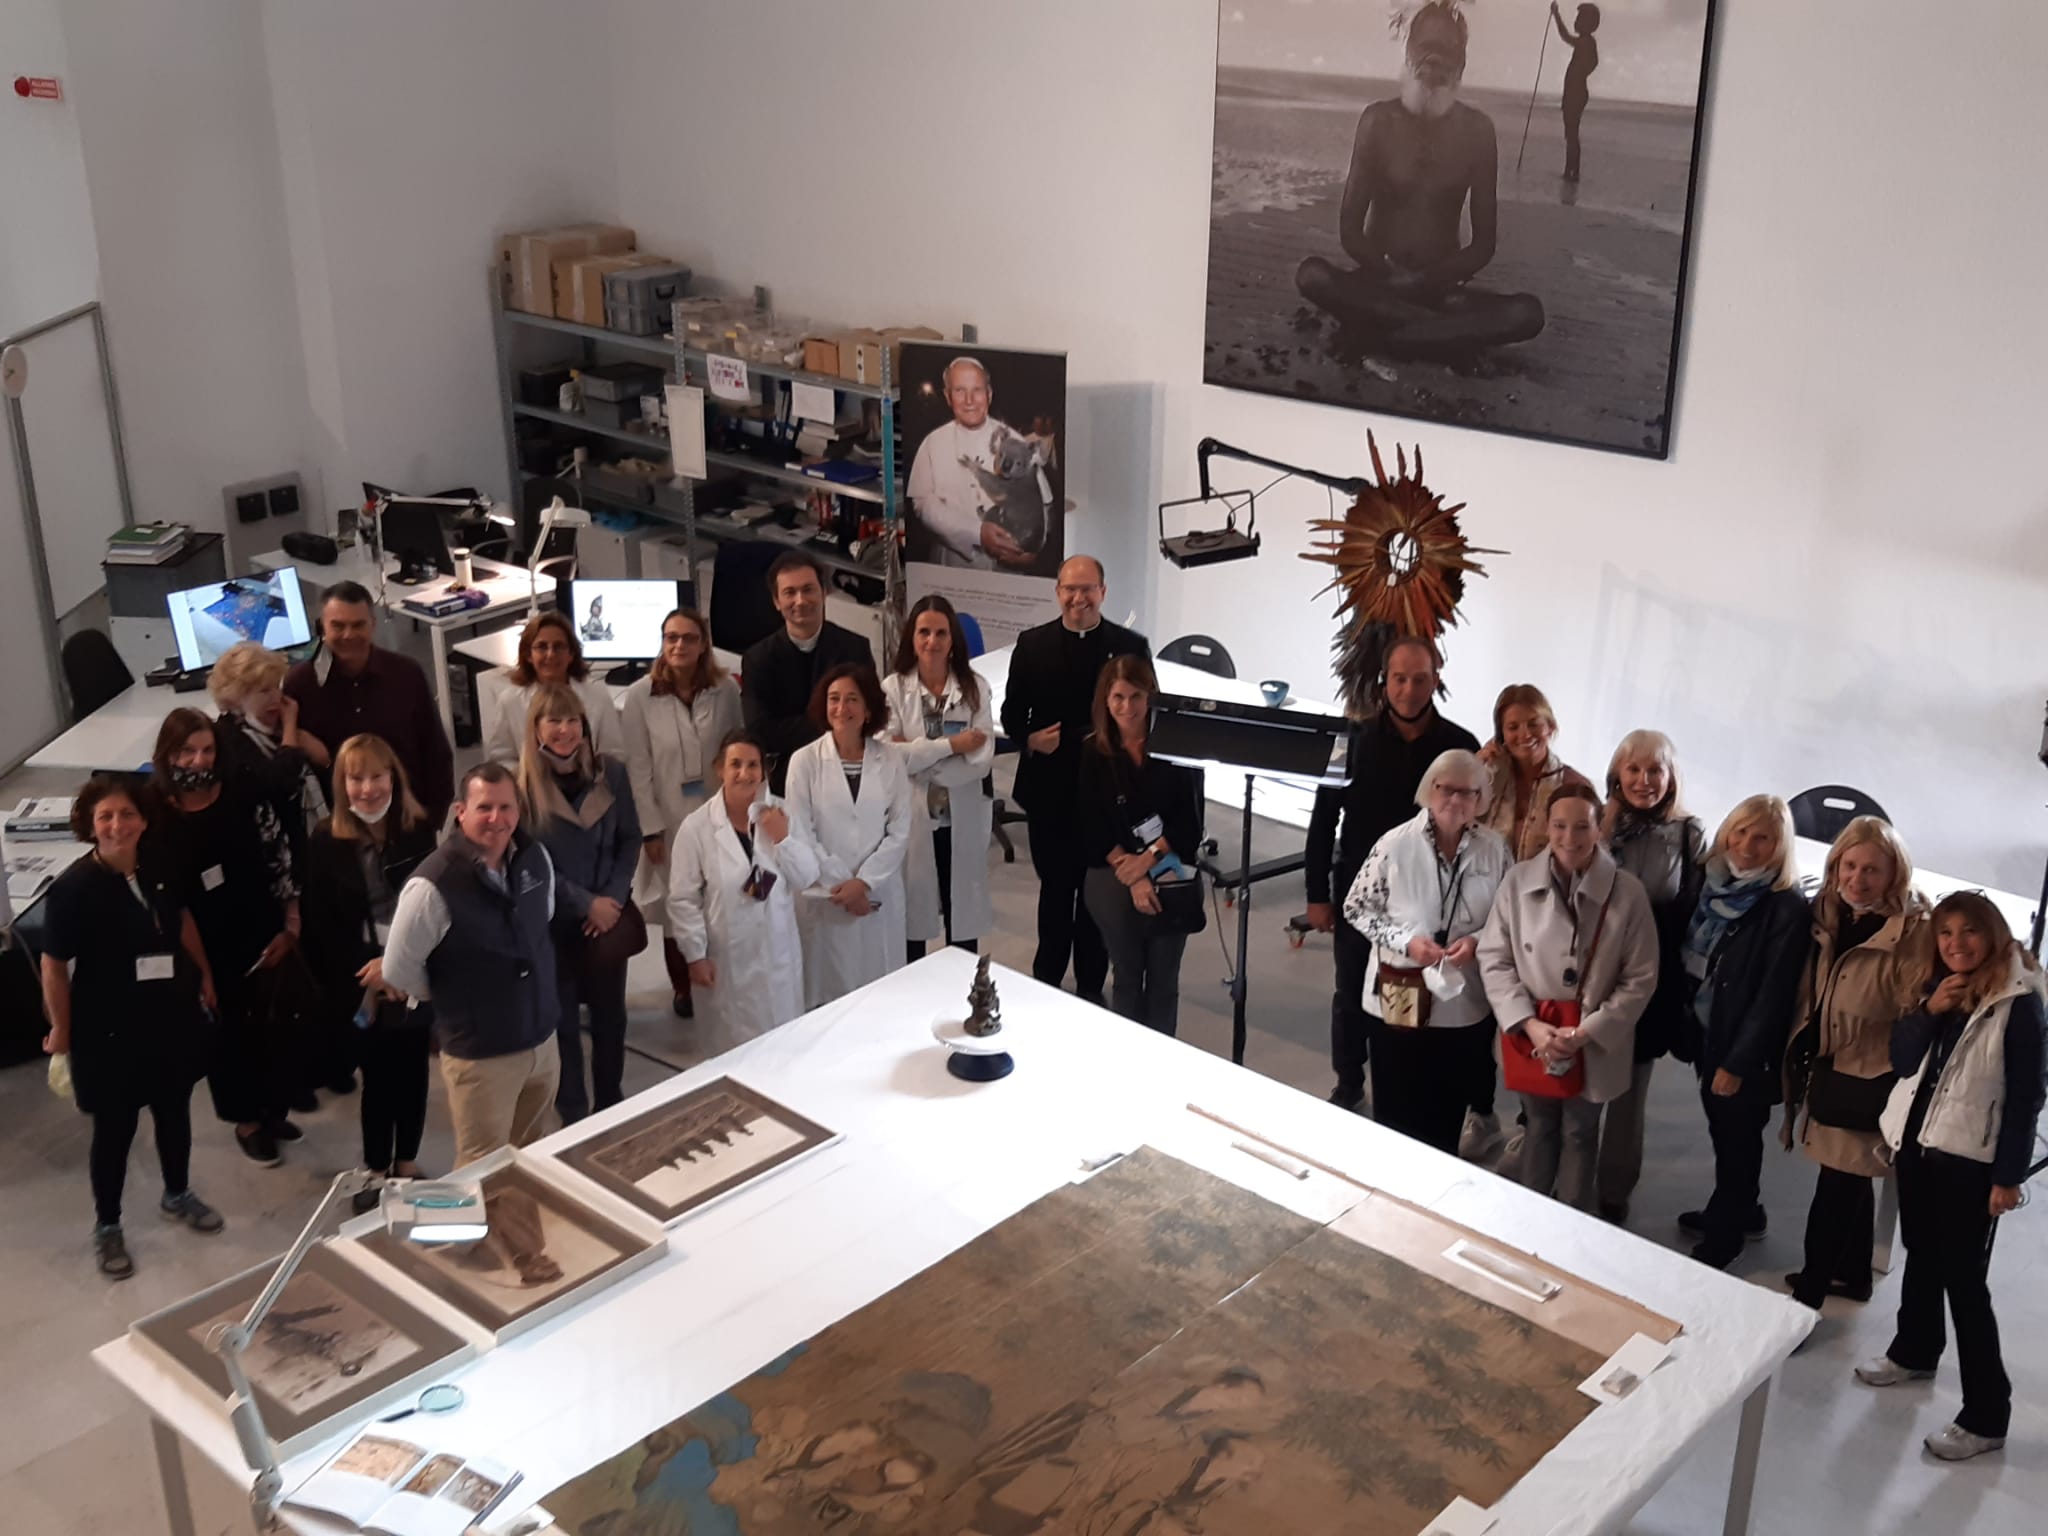 The group pictured with Fr Kevin Lixey, L.C., Fr Mapelli and Romina Cometti during a special stop at Ethnological Materials Conservation Laboratory the heart of the Anima Mundi Ethnological Museum.